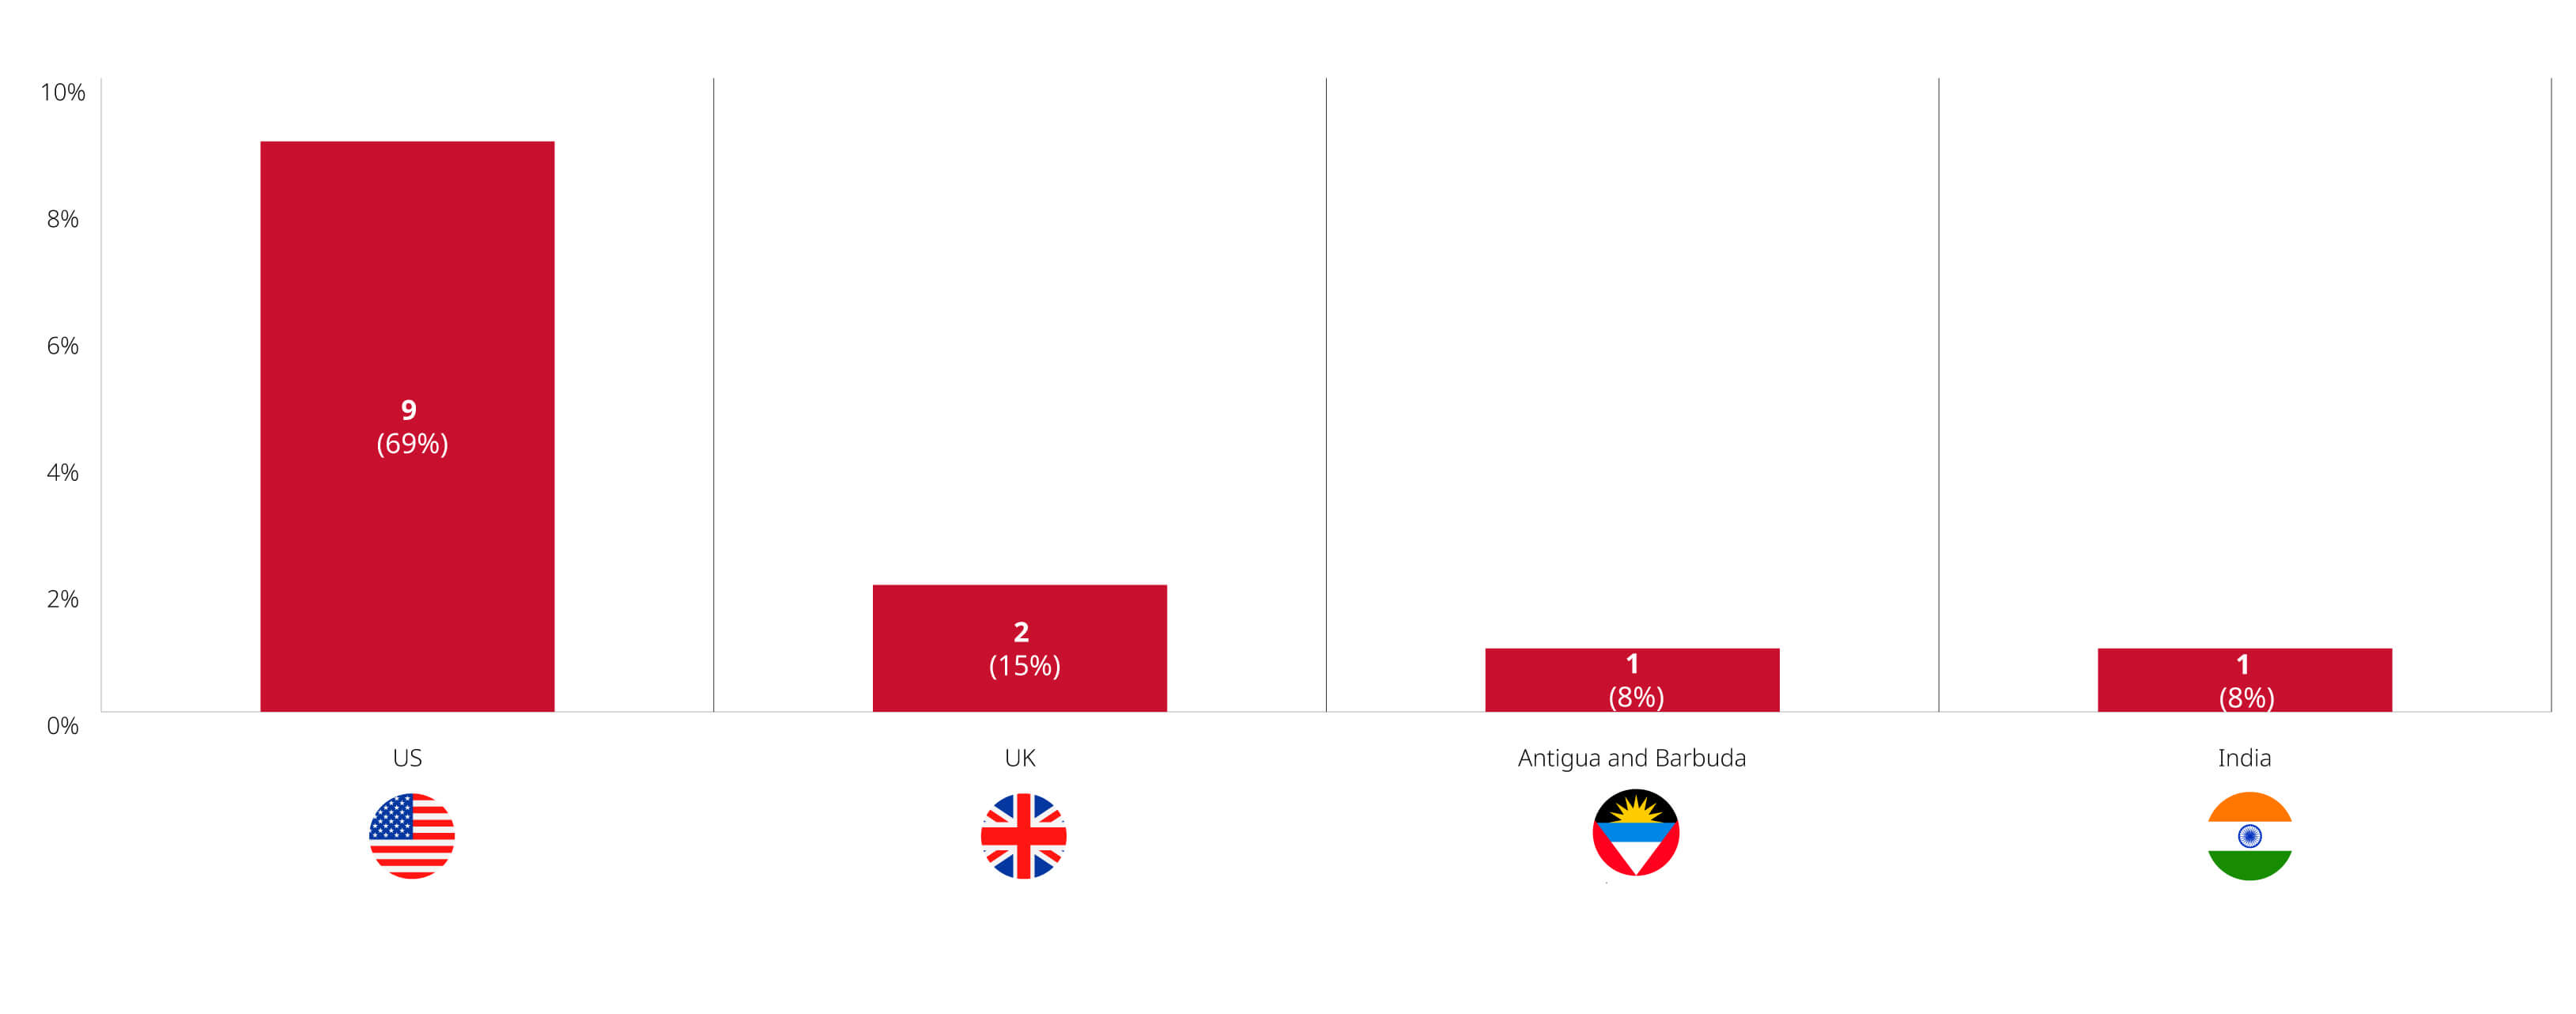 Bar graph showing cultural investments from US, UK, Antigua and Barbuda and India